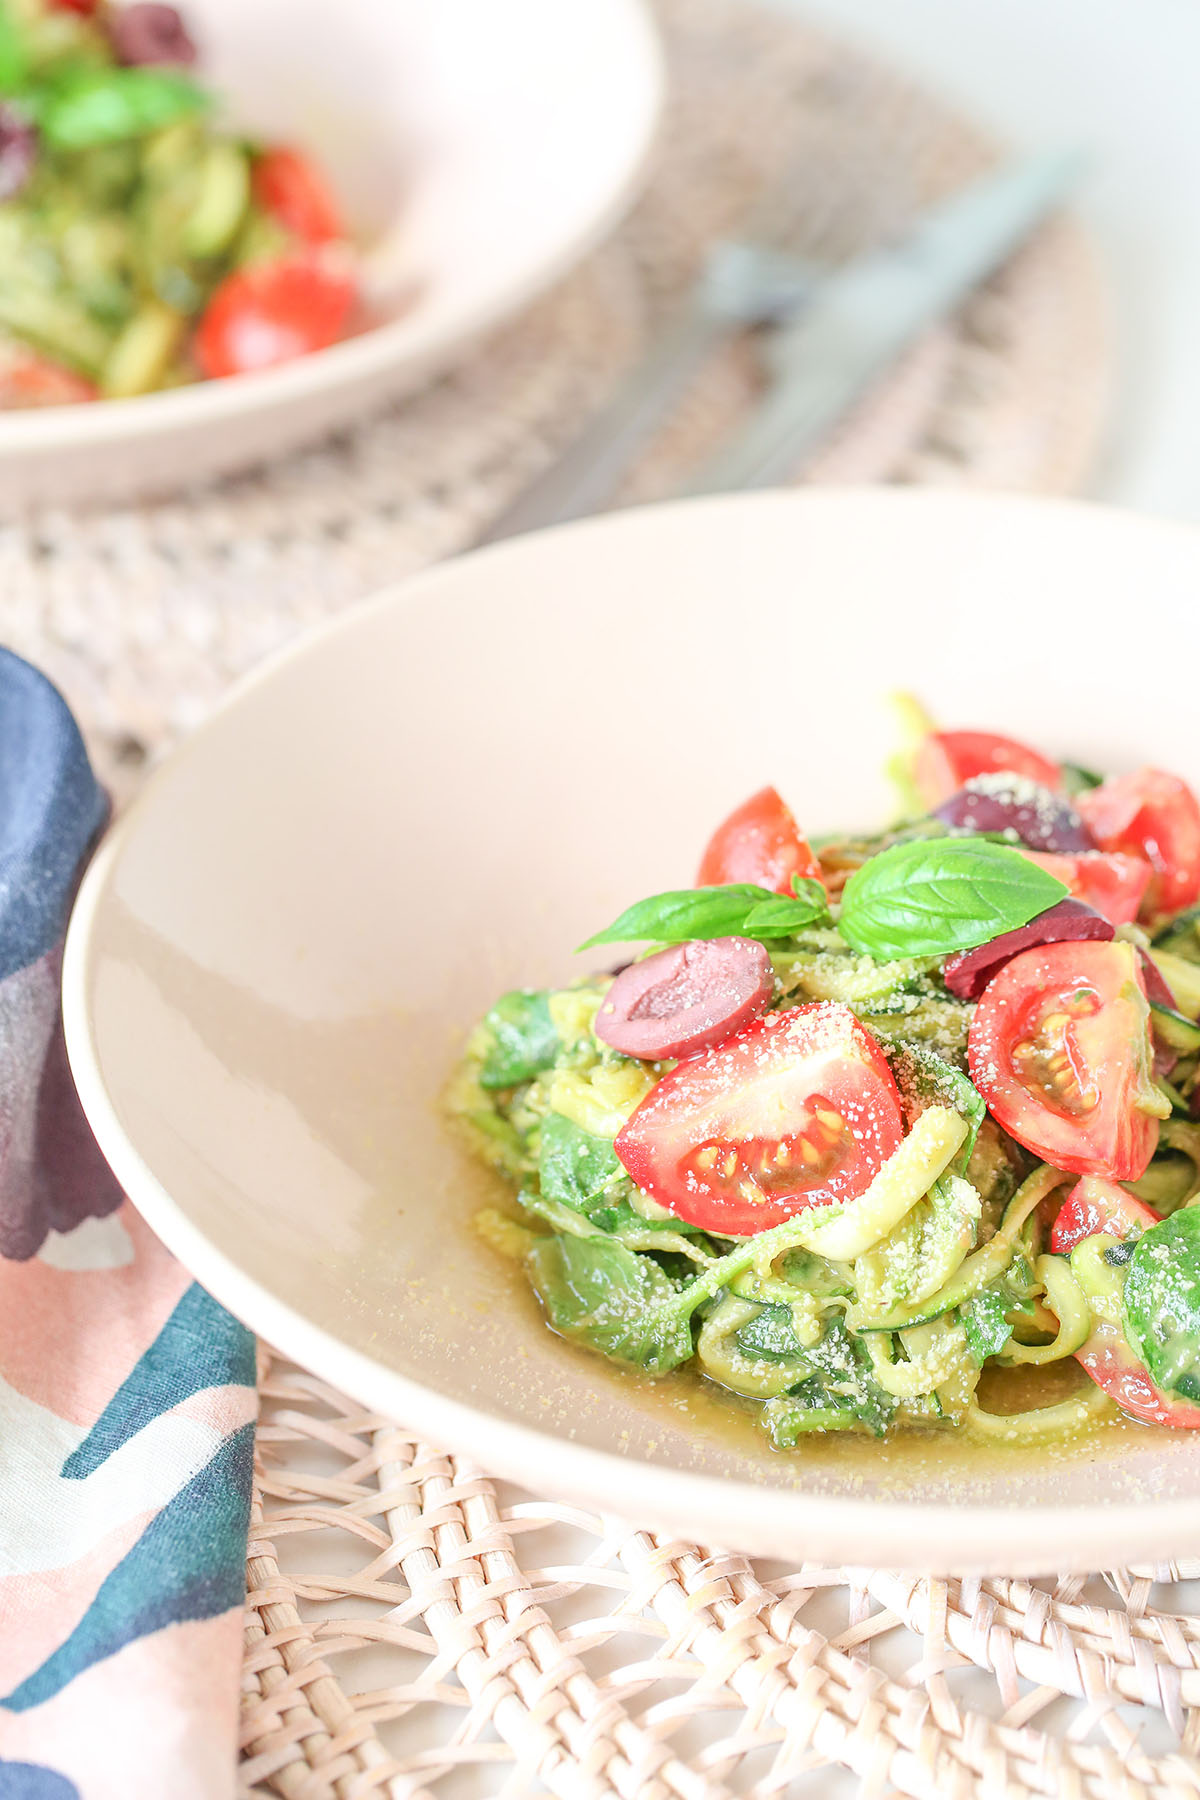 Best ever zoodles, made with zucchini noodles/spaghetti. If you’re looking for an easy zucchini pasta recipe, this one’s for you! 15 min, vegan, plant-based, nut free, dairy free, gluten free, paleo, keto, low carb.